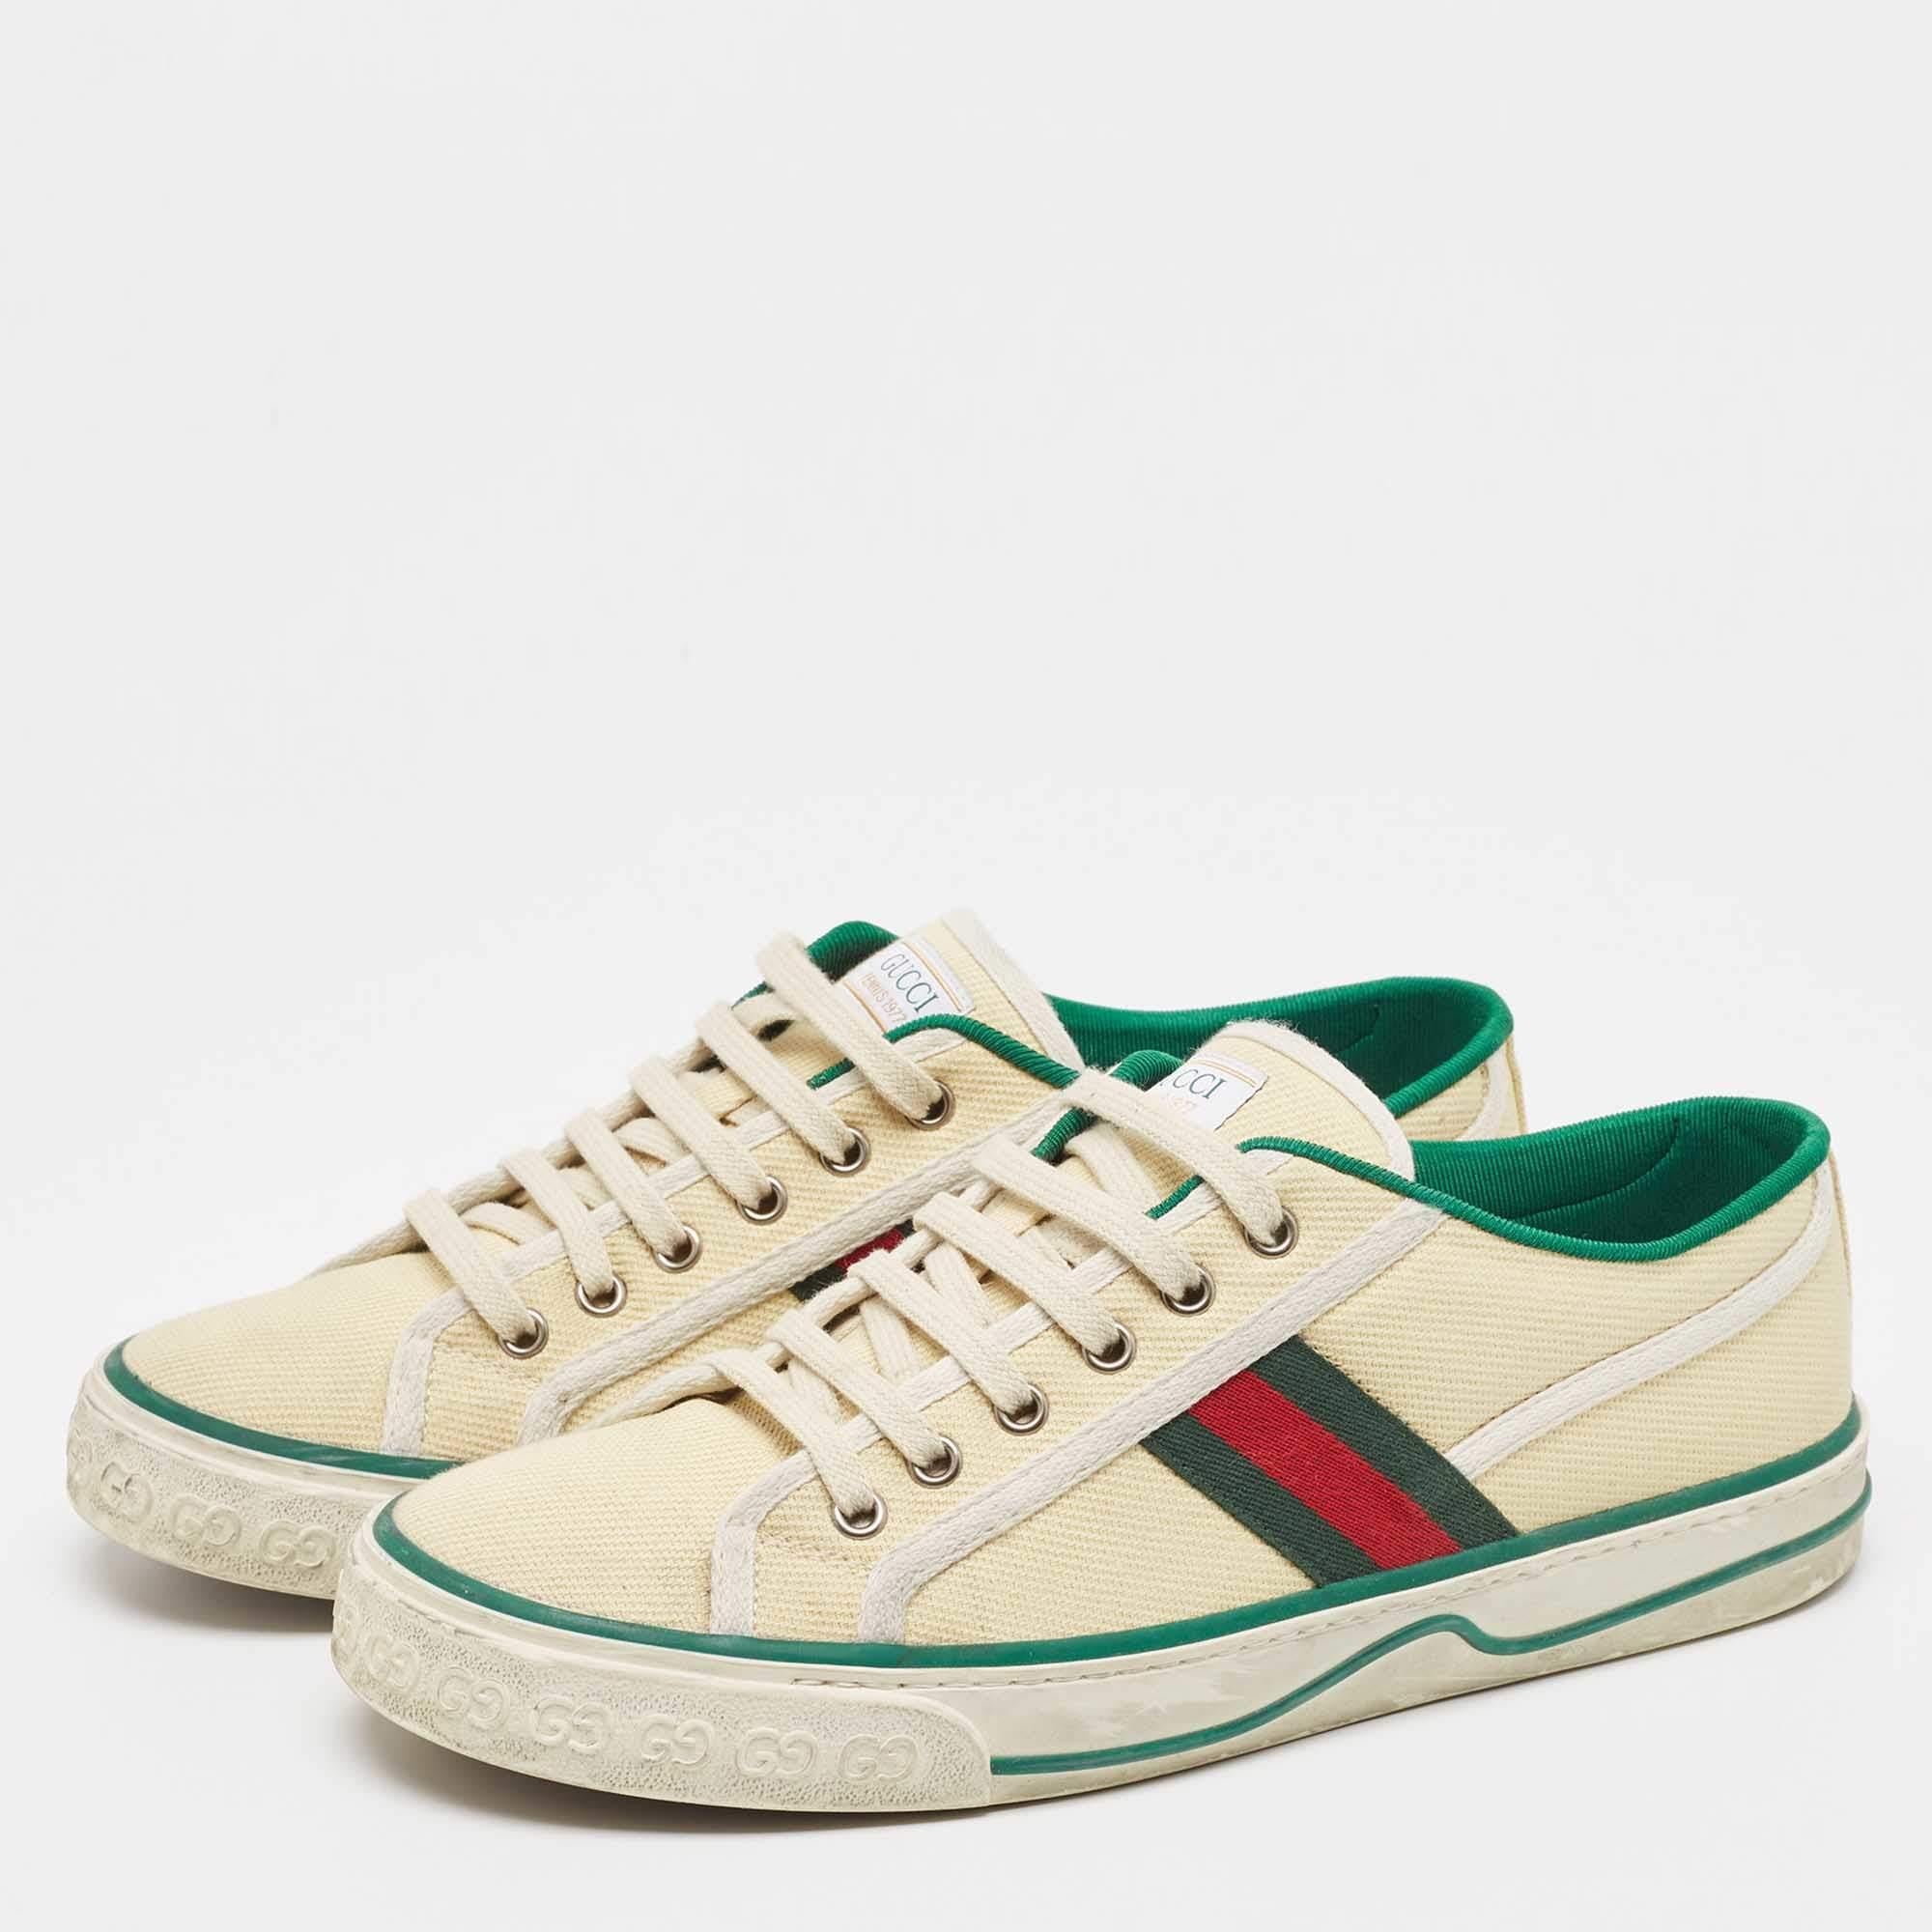 Give your outfit a luxe update with this pair of Gucci Tennis 1977 sneakers. The shoes are sewn perfectly to help you make a statement in them for a long time.

